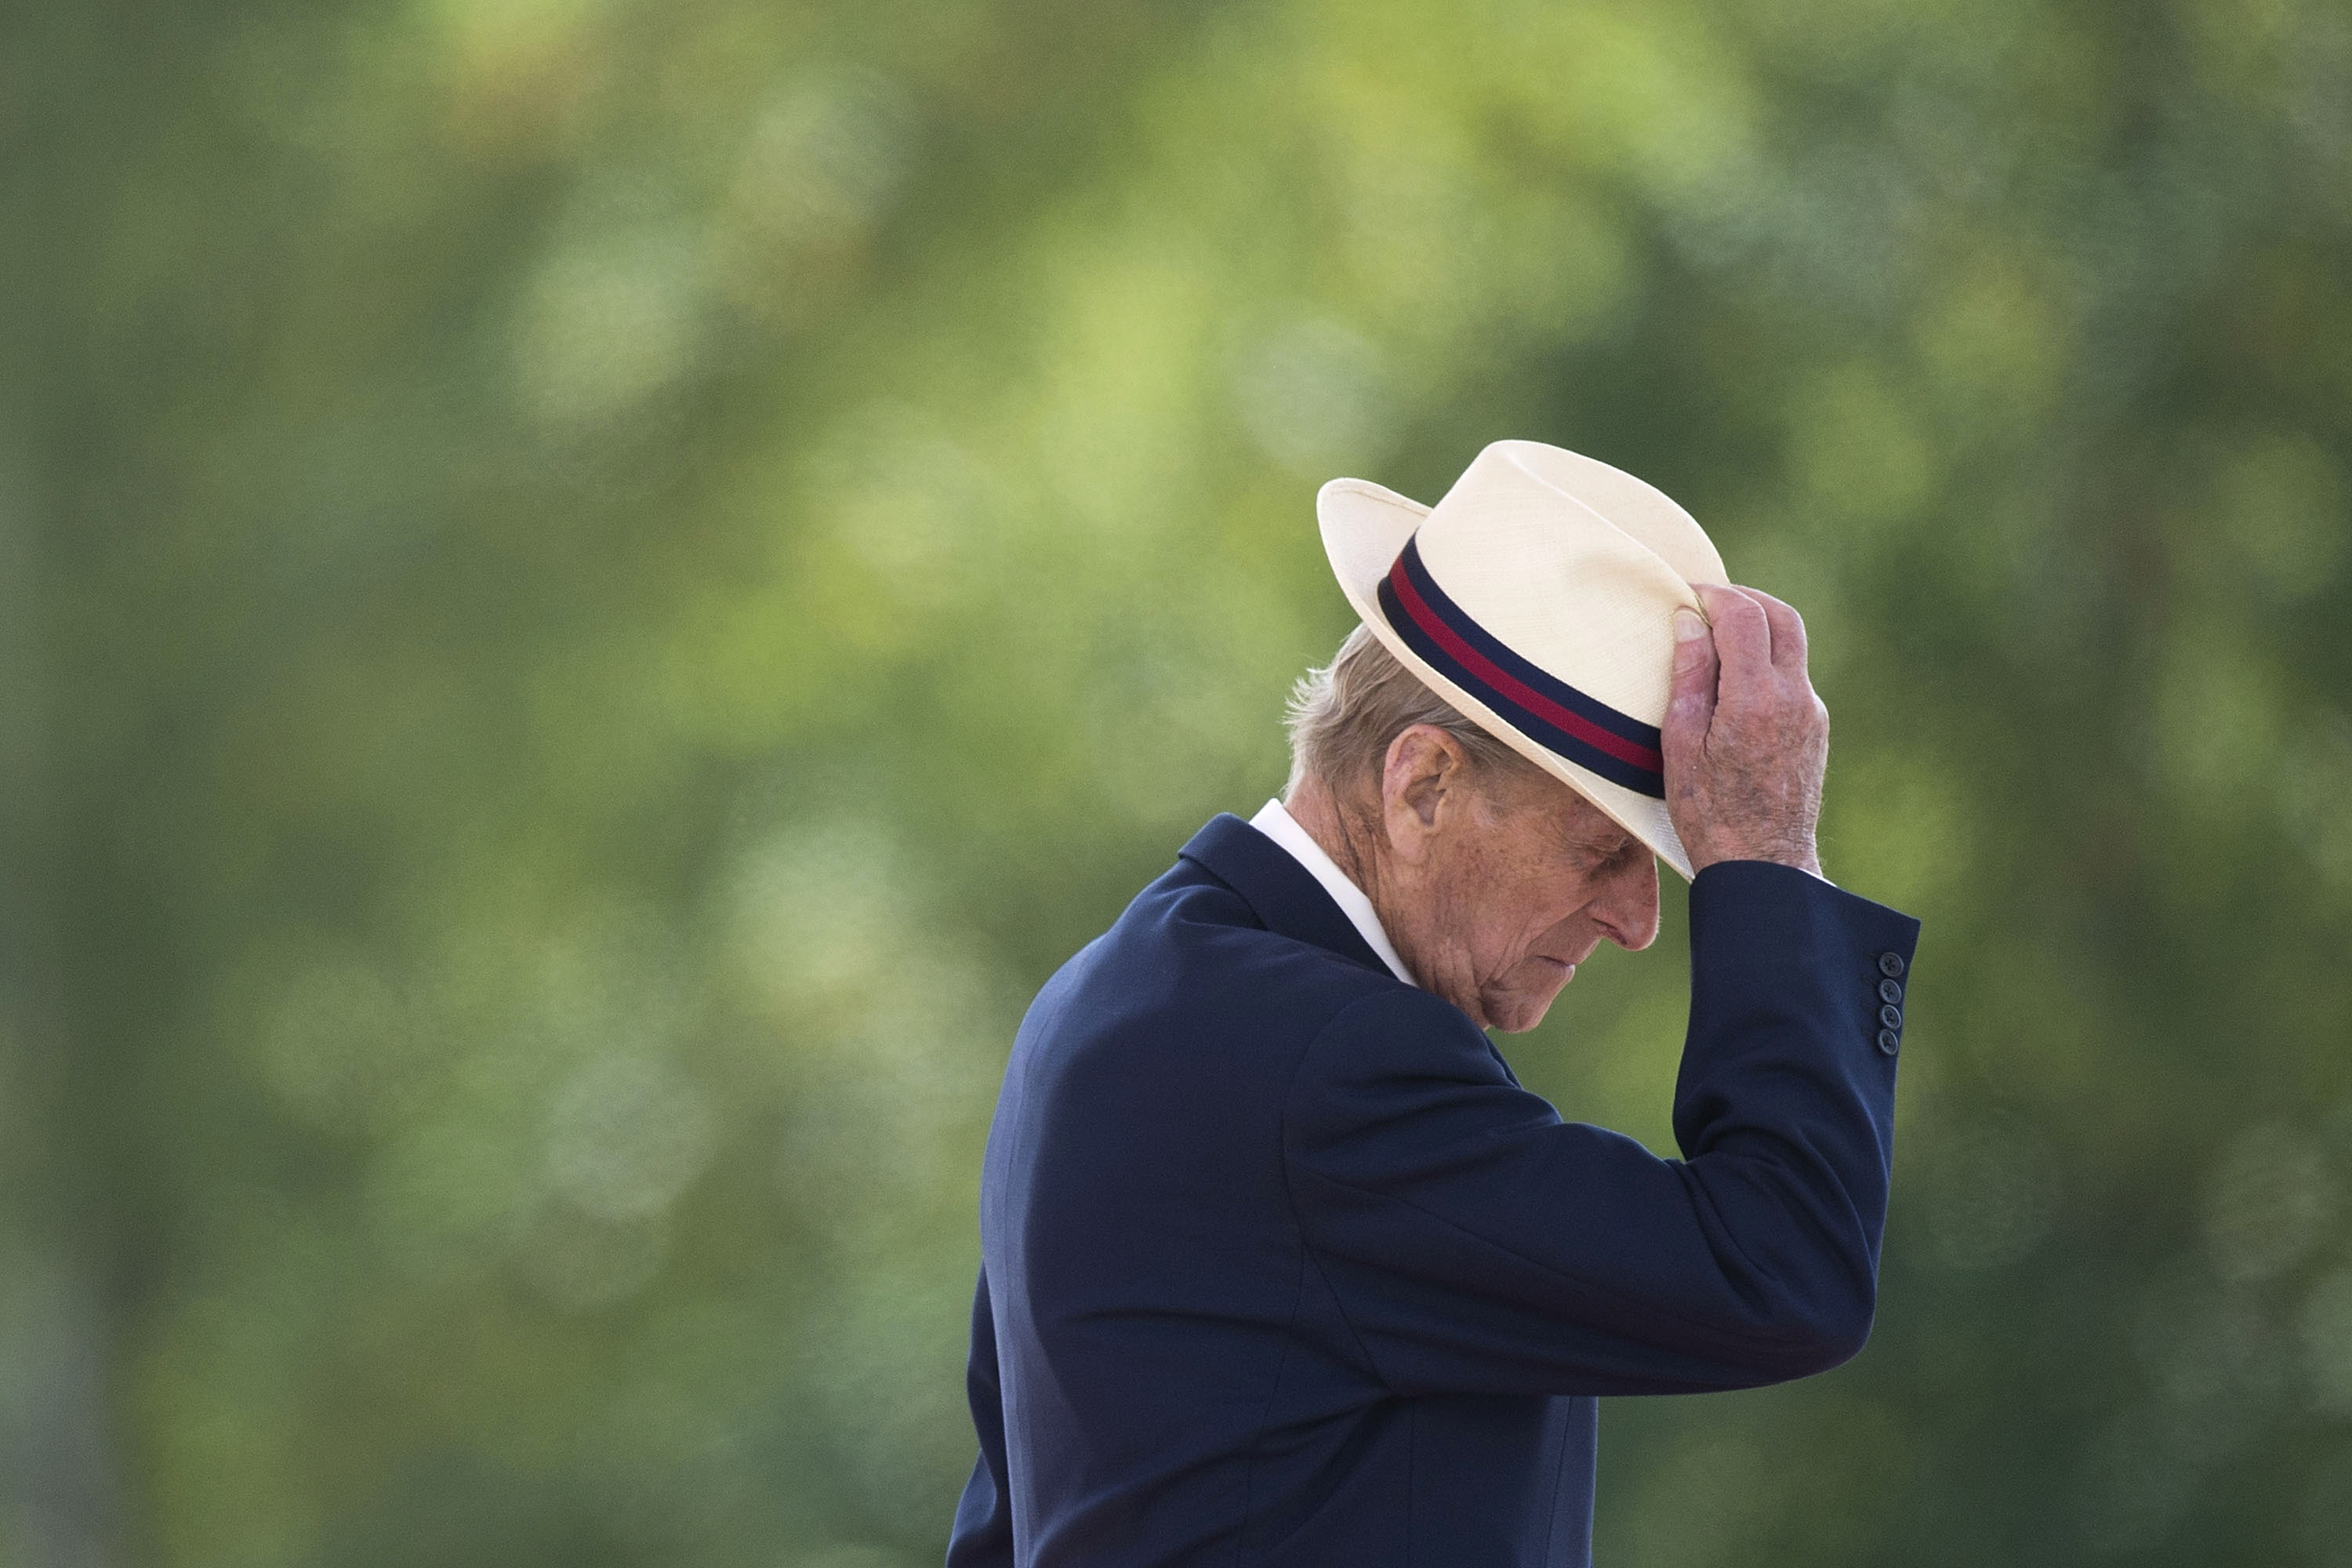 Prince Philip tugs the top of his hat after presenting medals in Fallingbostel, Germany